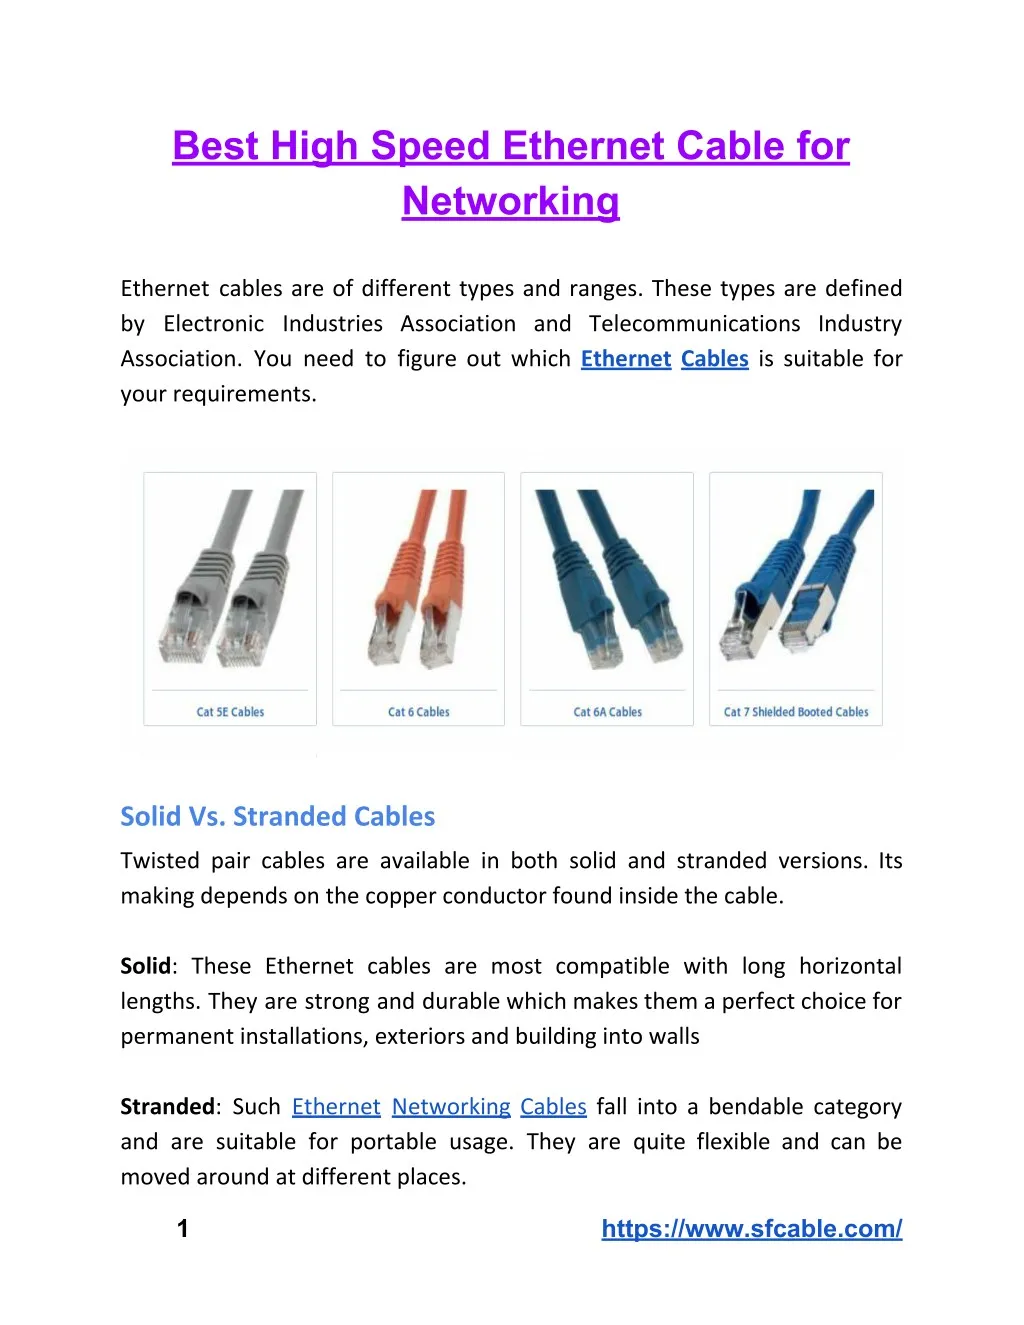 PPT - Best High Speed Ethernet Cable for Networking PowerPoint ...